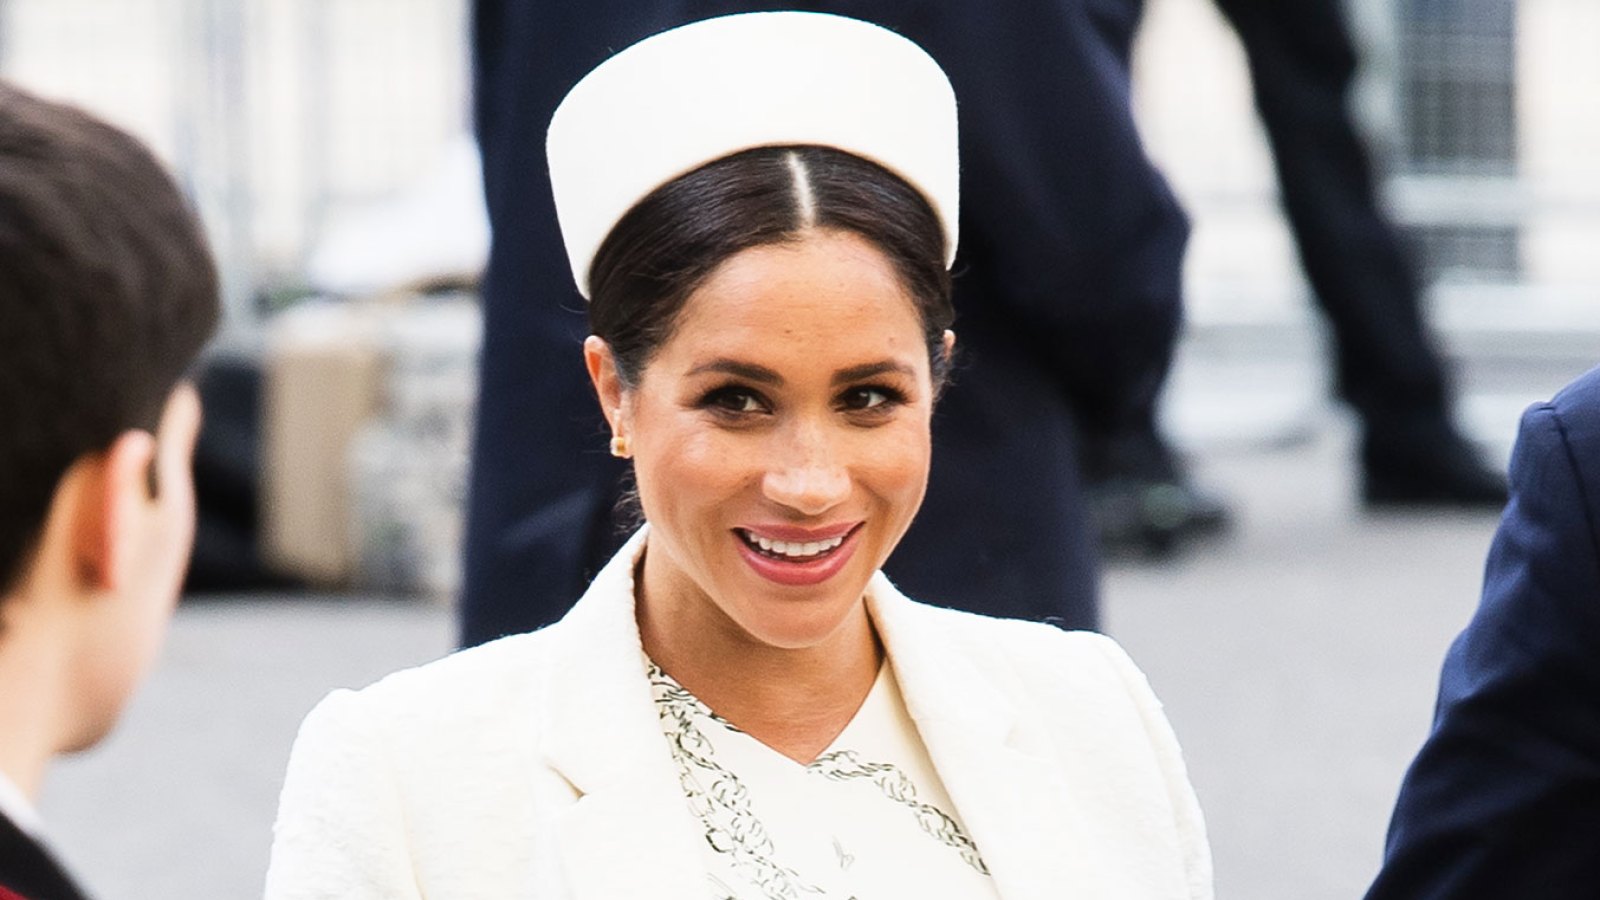 Meghan Markle's Makeup Artist Daniel Martin Opens Up About the First Time He Ever Worked With Her